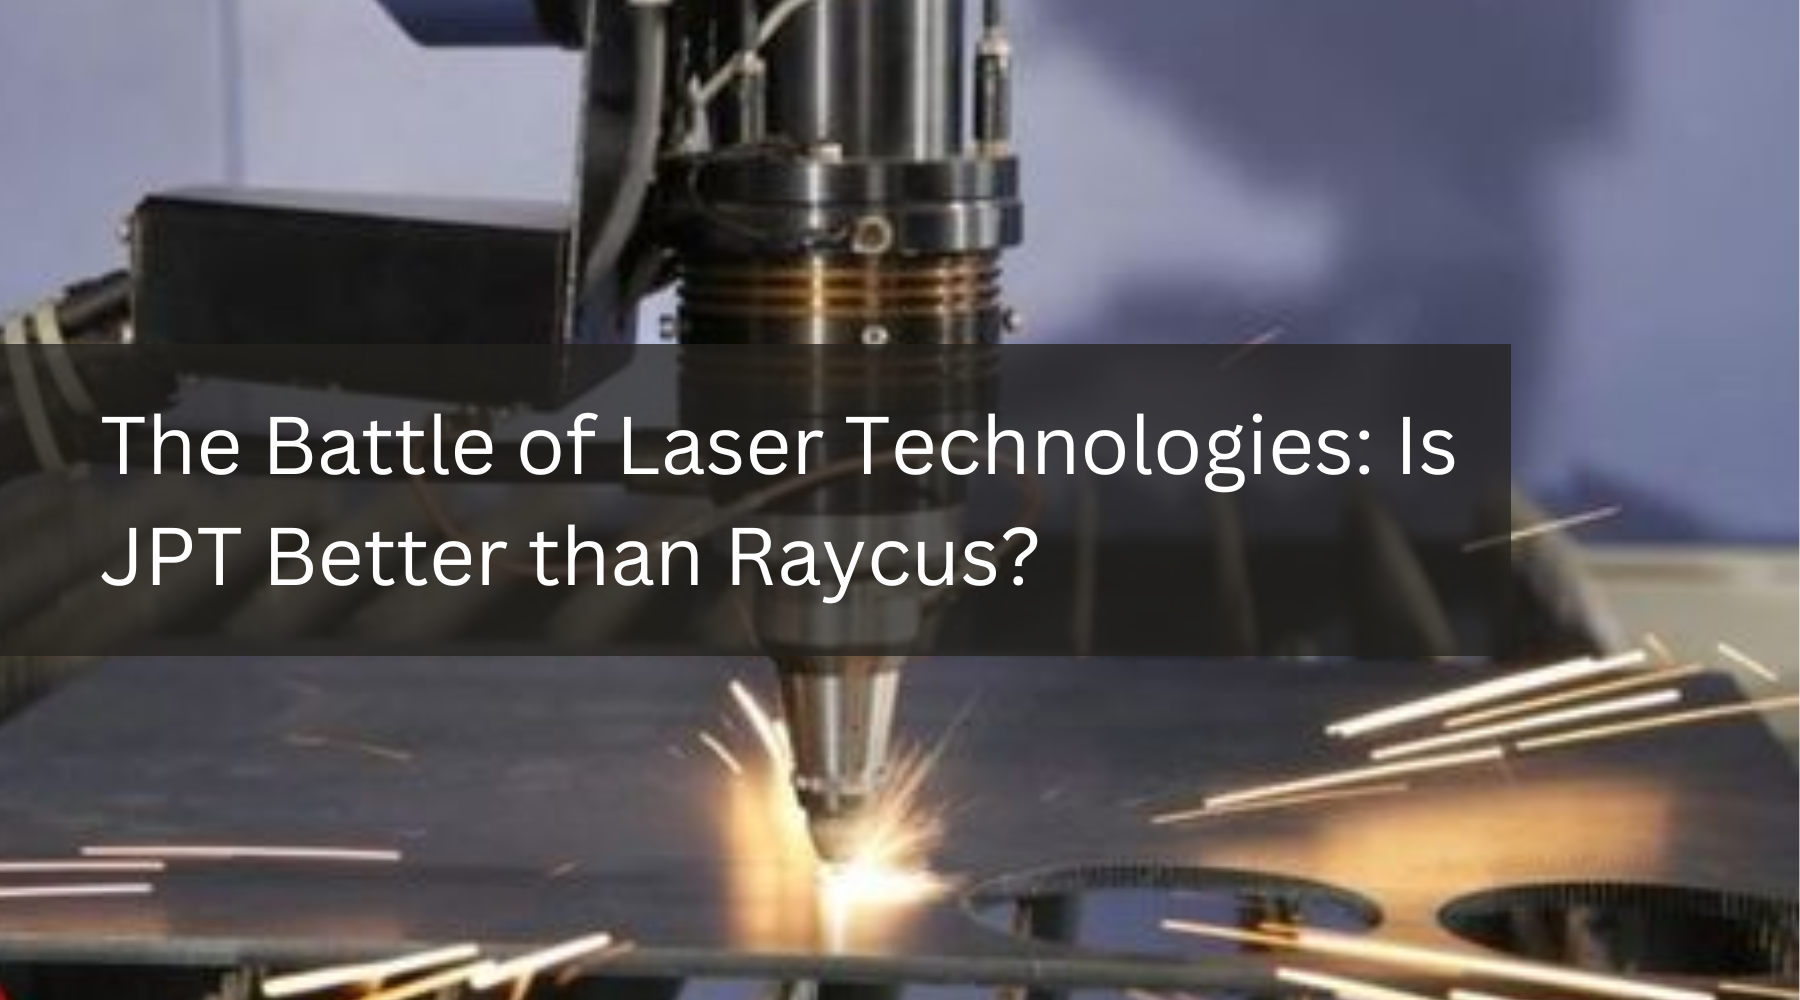 The Battle of Laser Technologies: Is JPT Better than Raycus?